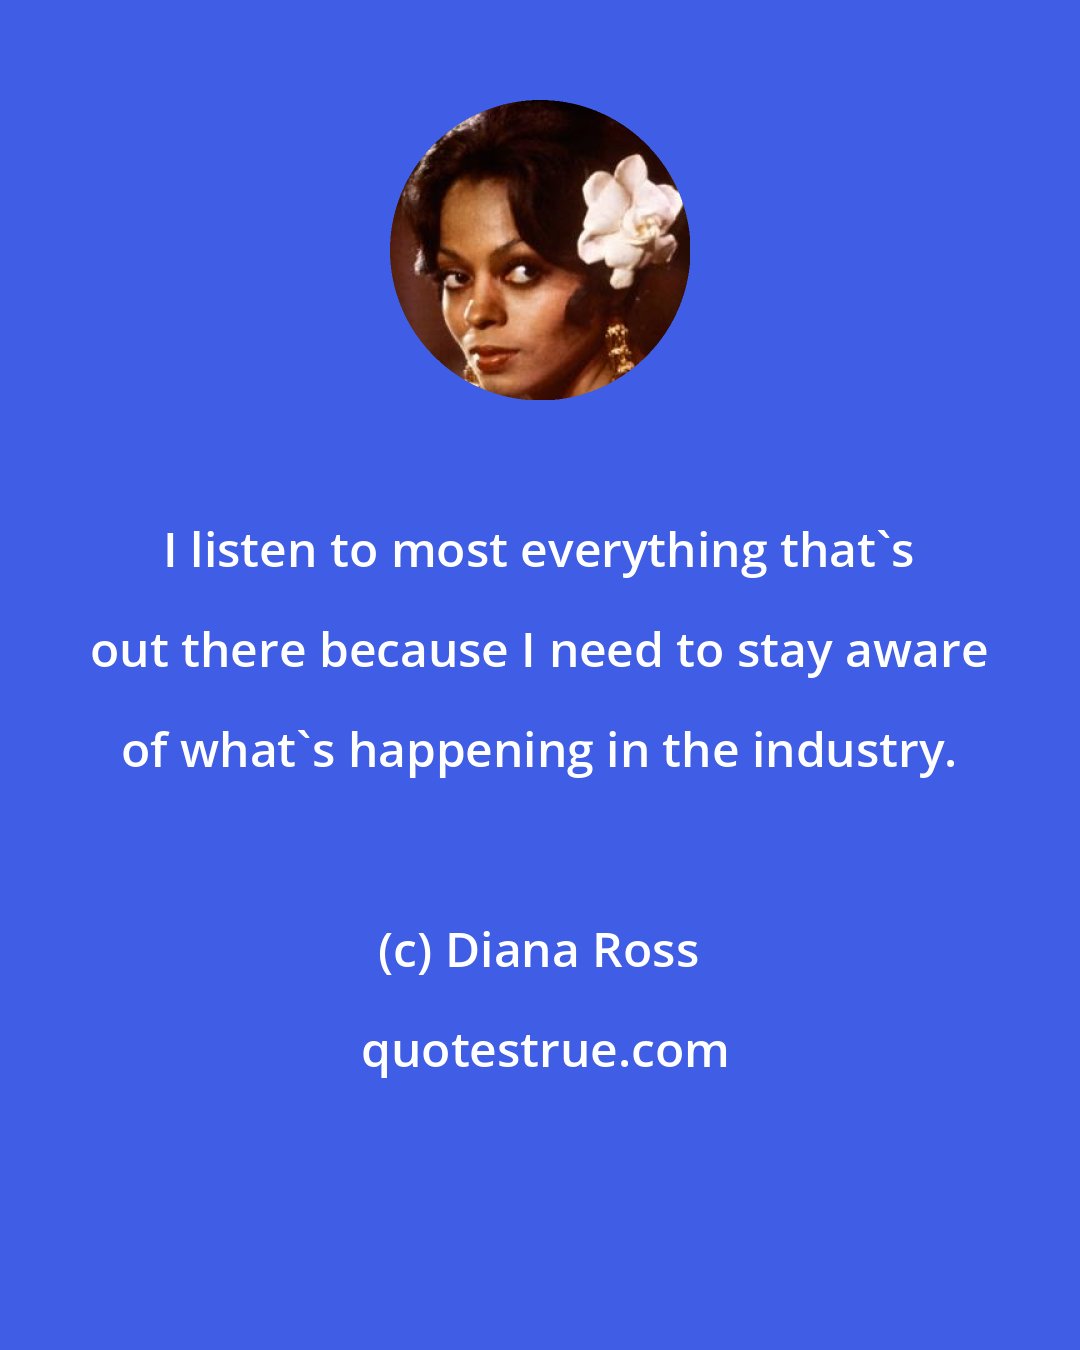 Diana Ross: I listen to most everything that's out there because I need to stay aware of what's happening in the industry.